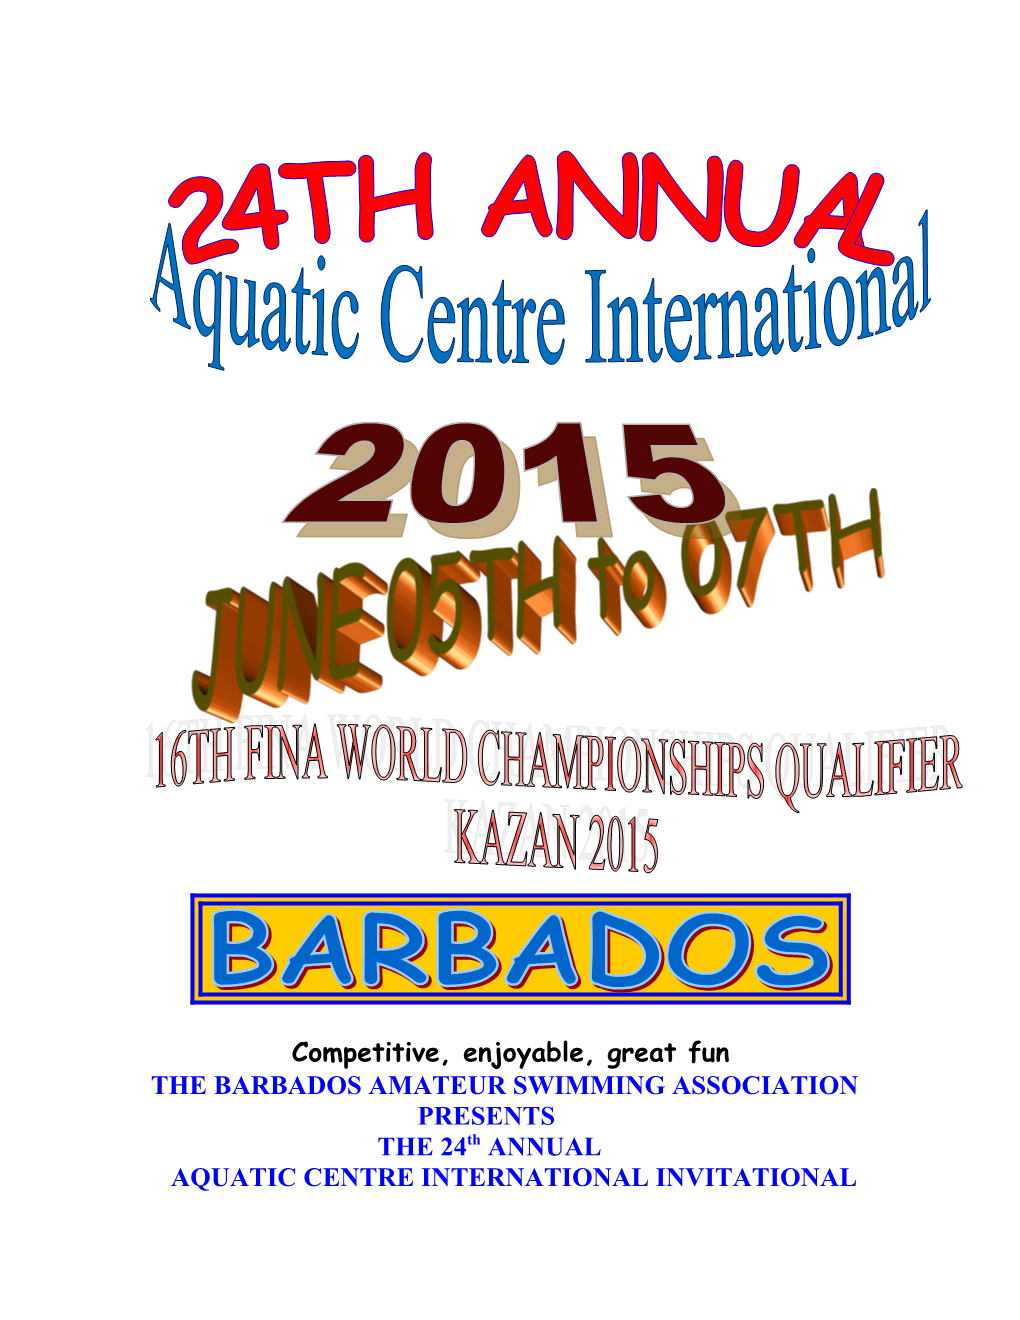 The Barbados Amateur Swimming Association